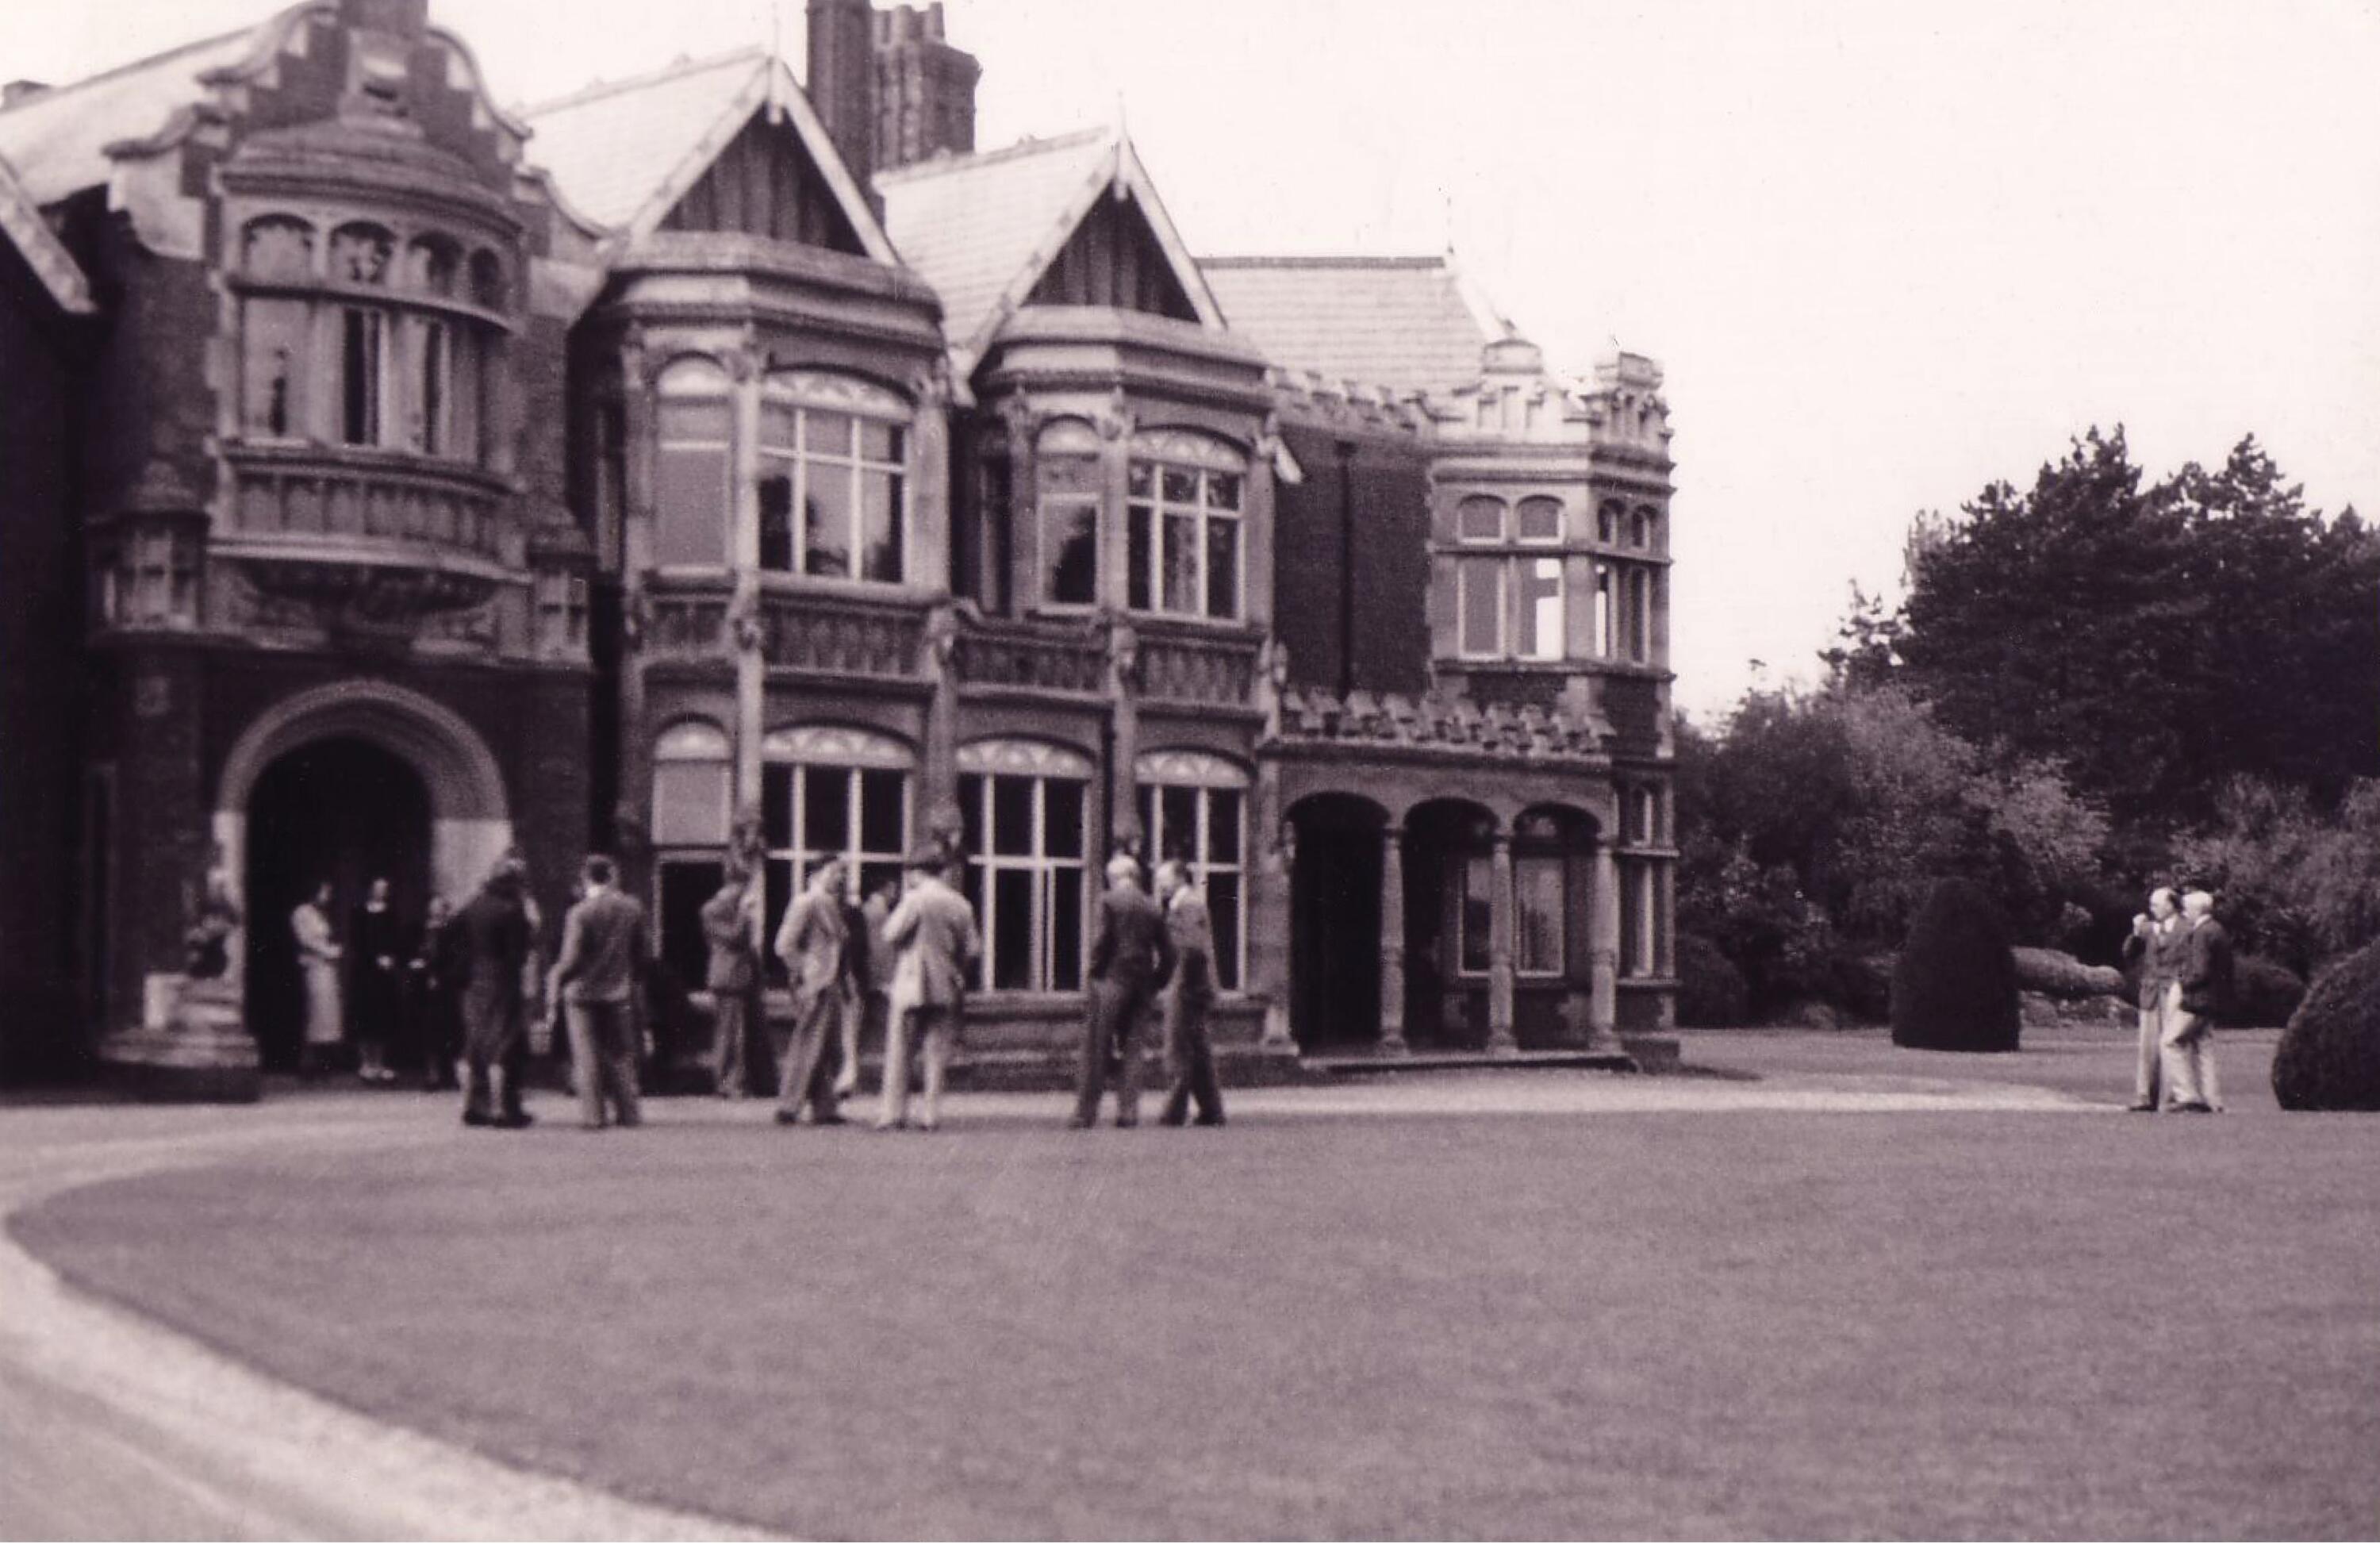 Image of Bletchley Park